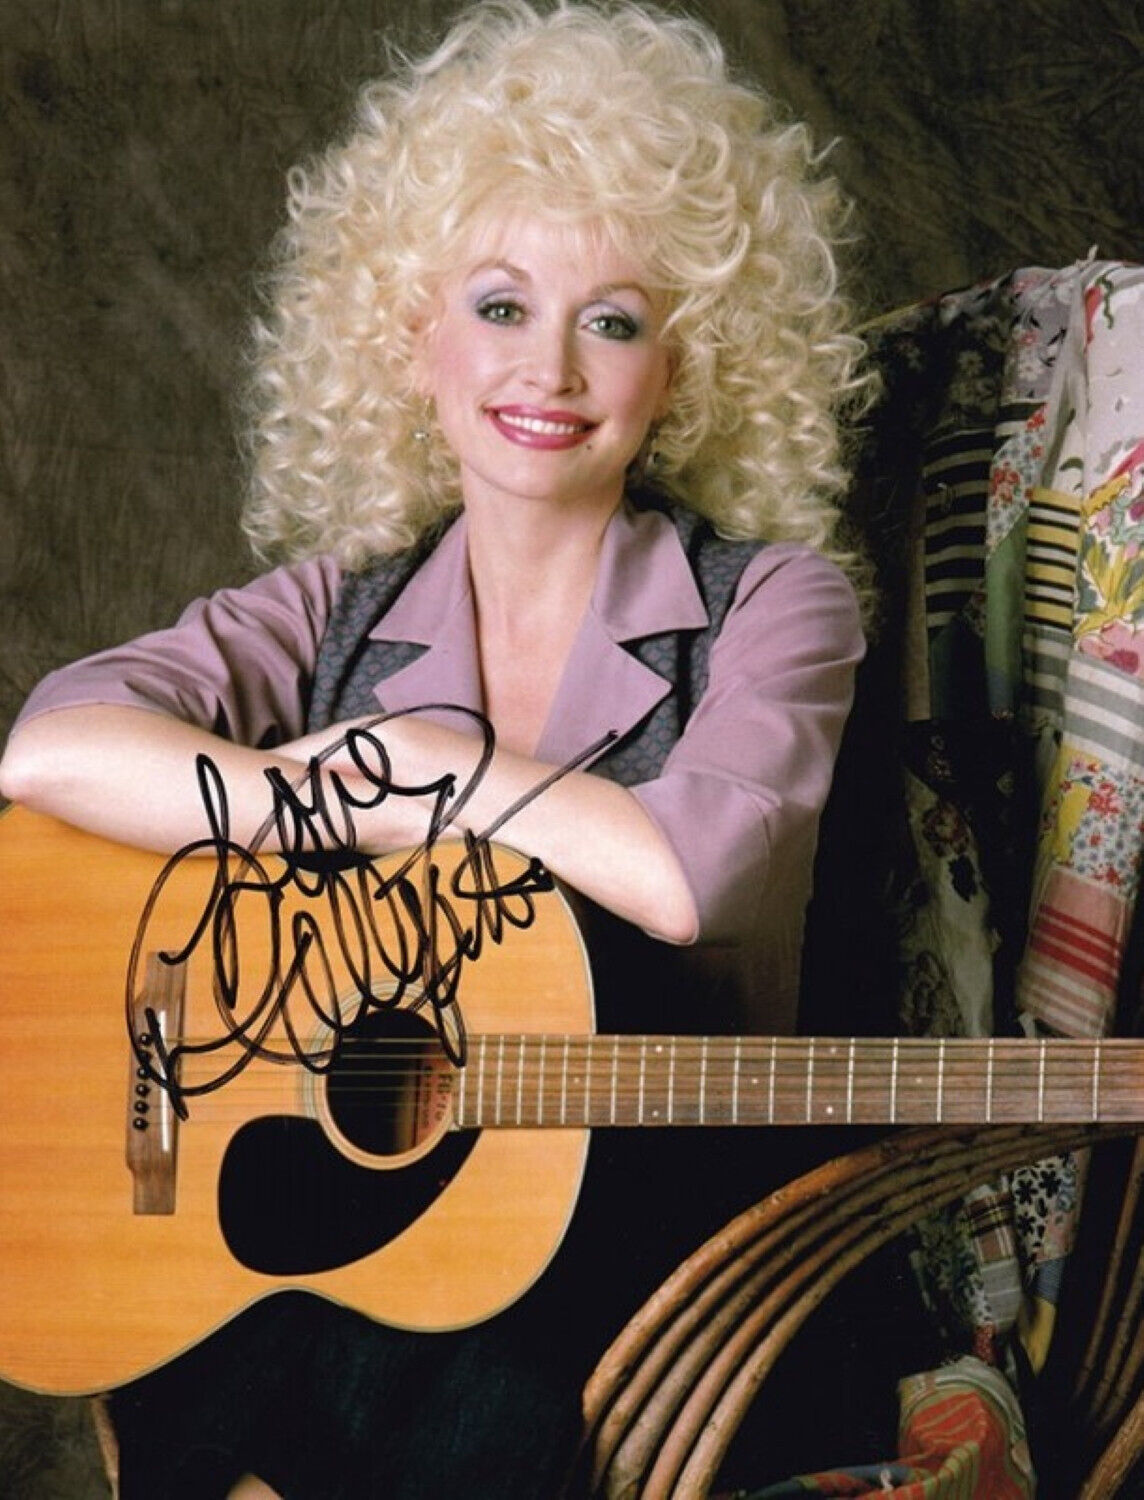 Dolly Parton signed 8.5x11 Signed Photo Reprint